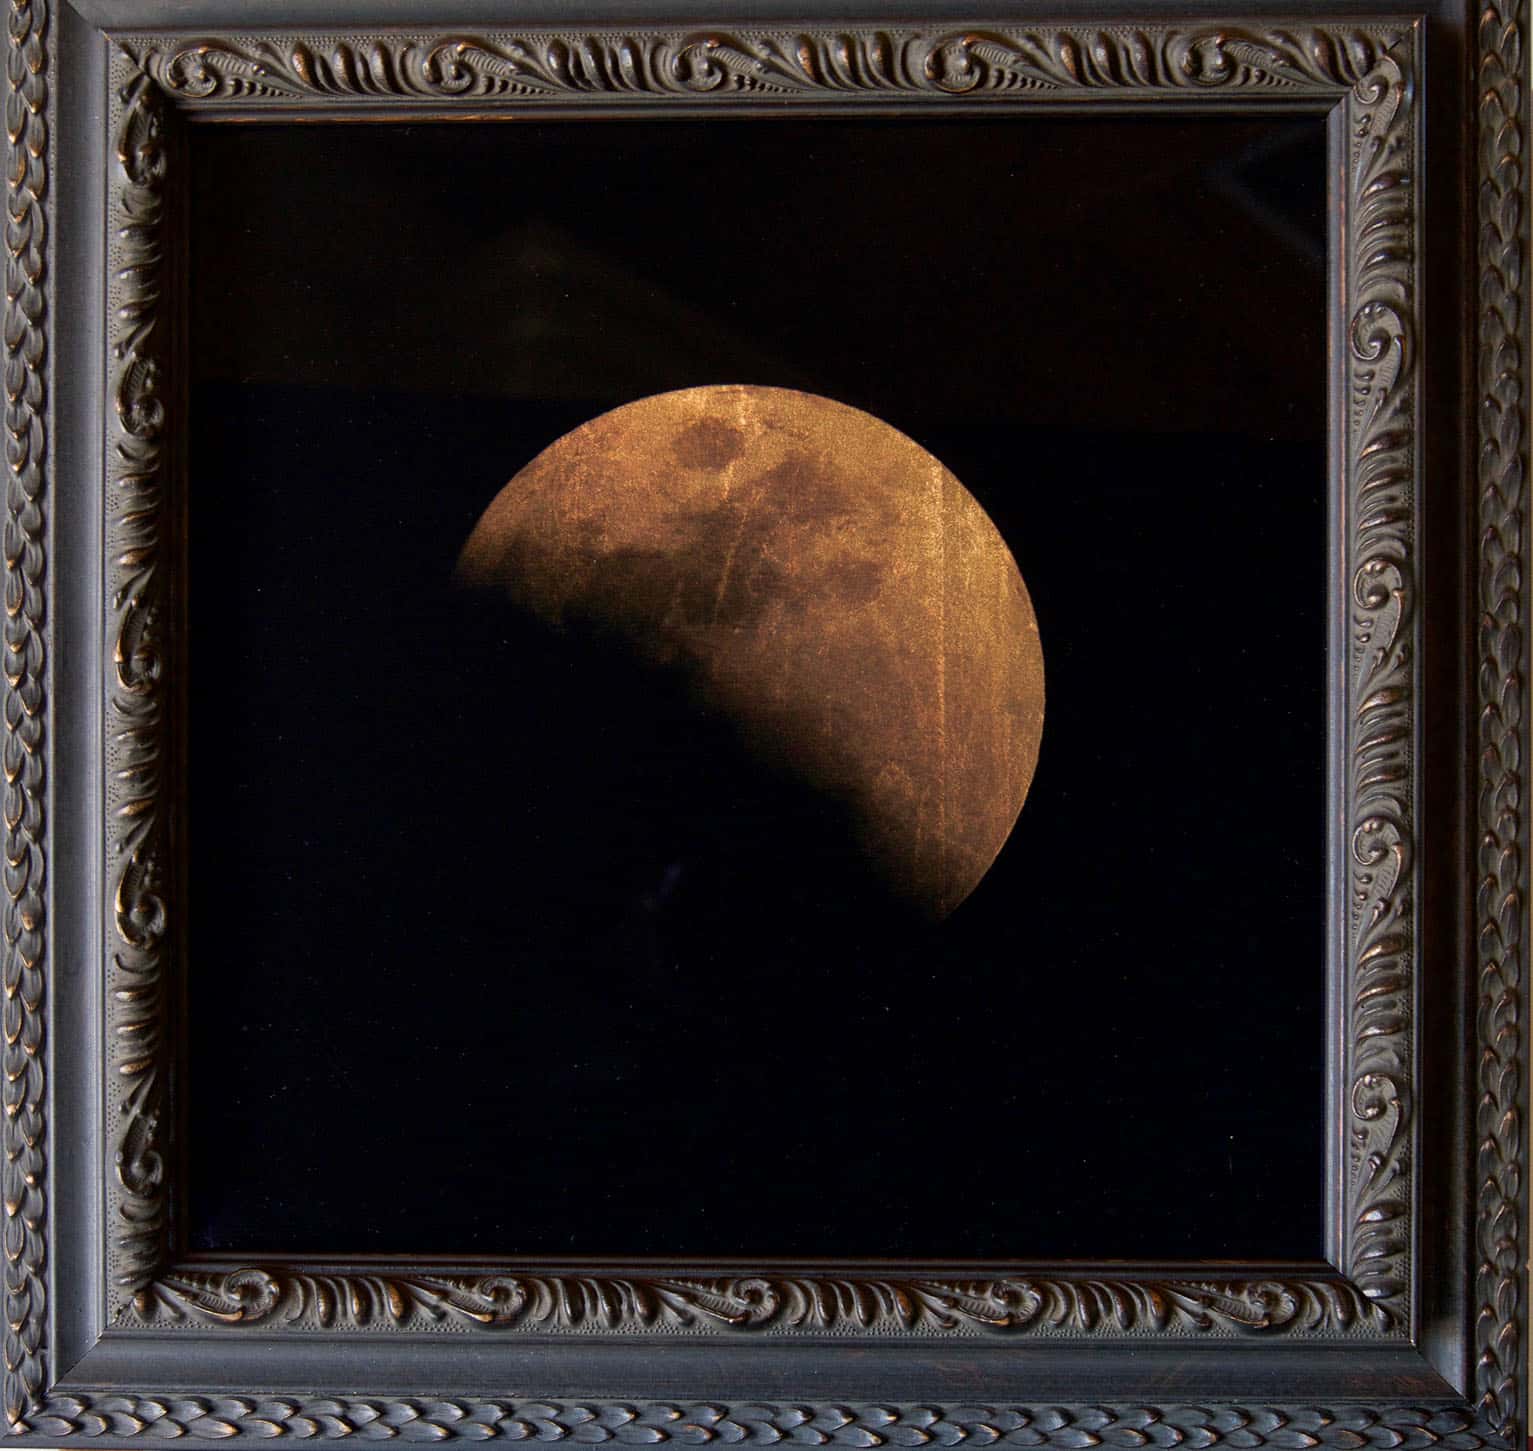  Lunar Eclipse Feb 2008, Kate Breakey, Catherine Couturier Gallery